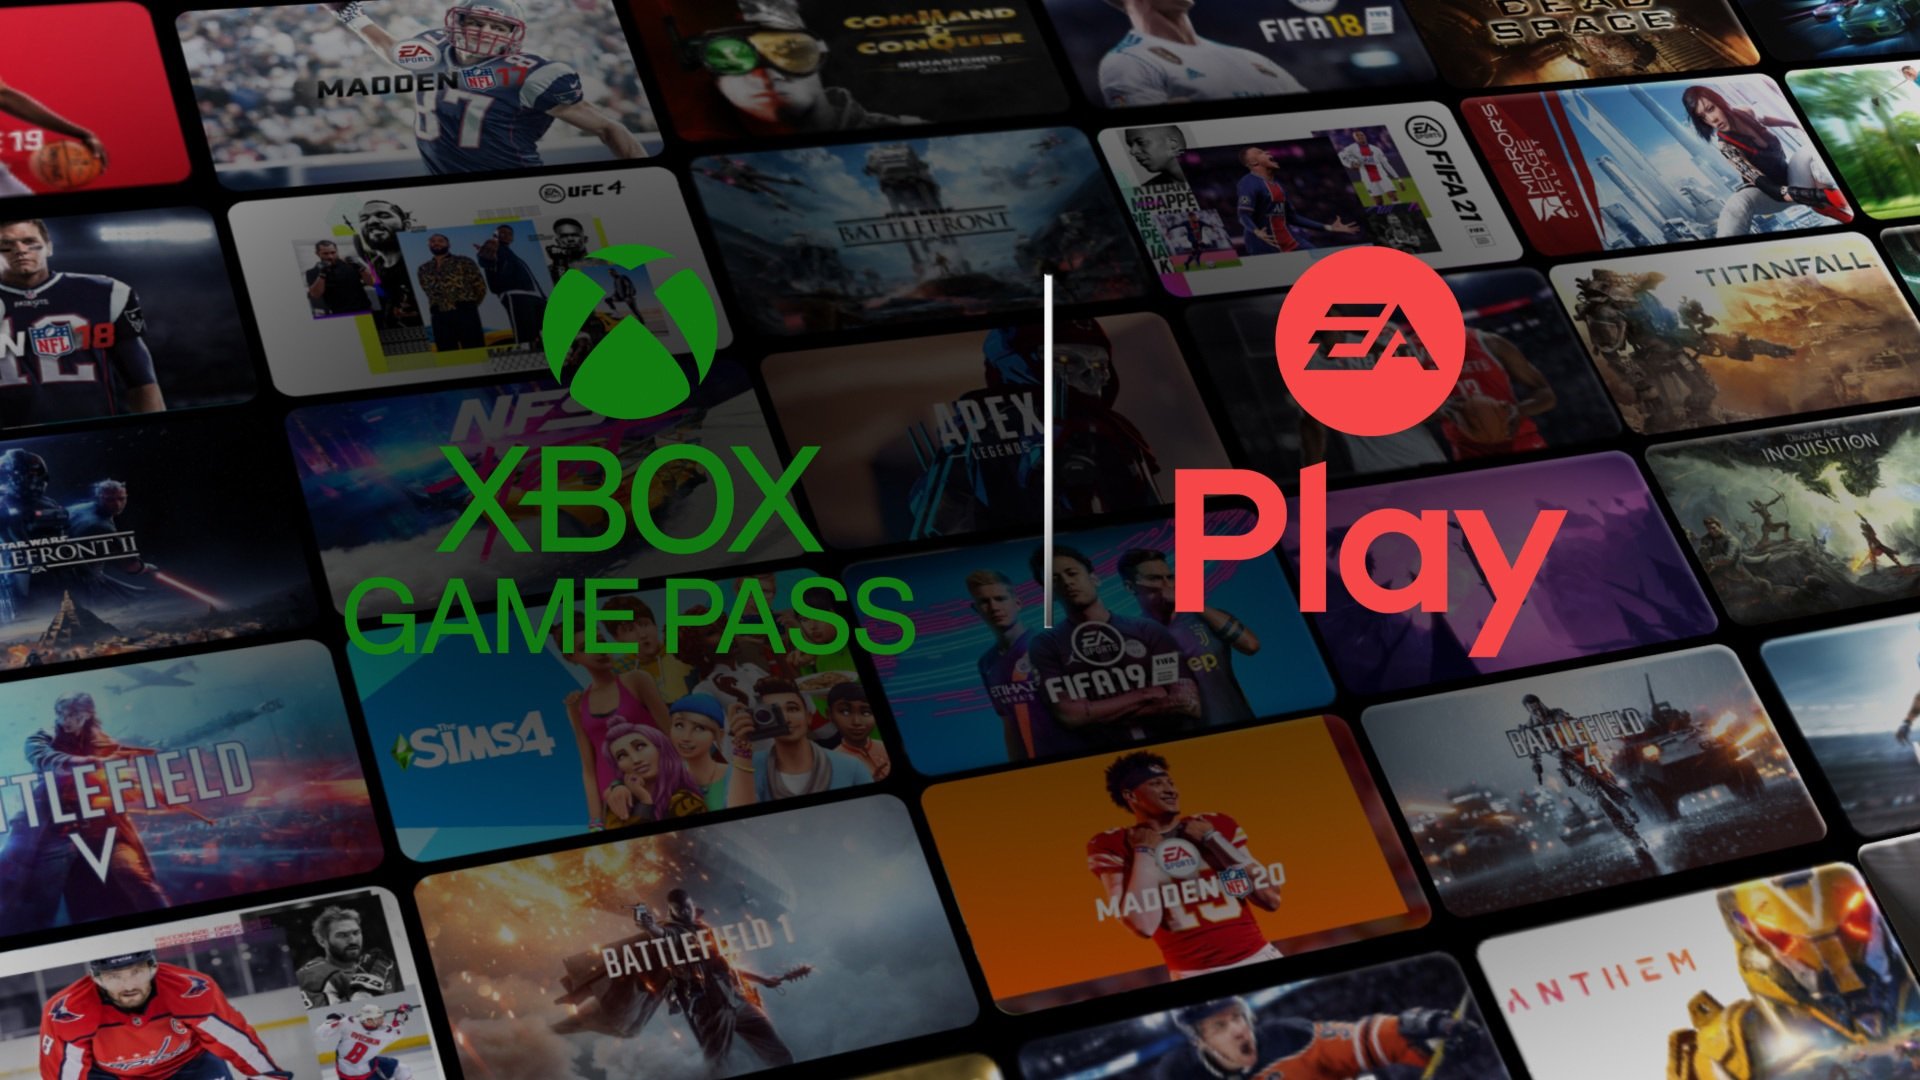 First batch of 10 Games joining Xbox Game Pass in November, plus